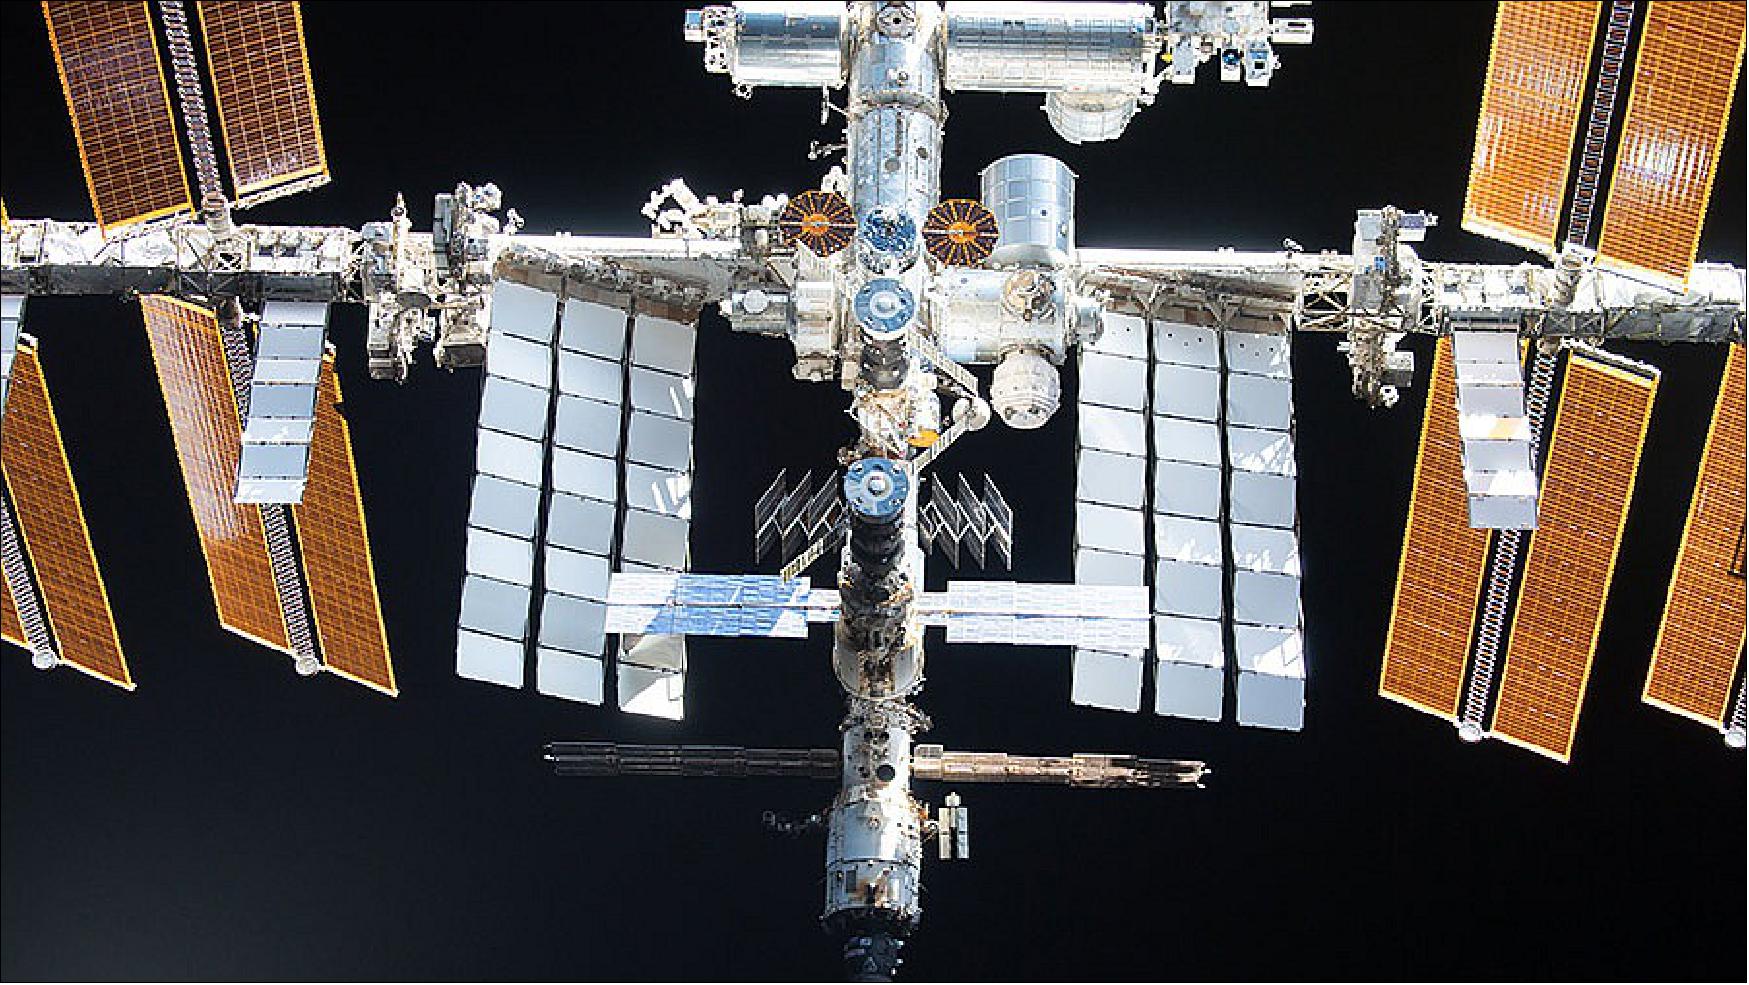 Figure 19: The Crew-2 got these amazing views of the ISS during a fly-around of the orbiting lab after undocking from the Harmony module on 8 November, before their return to Earth (image credit: NASA/ESA)